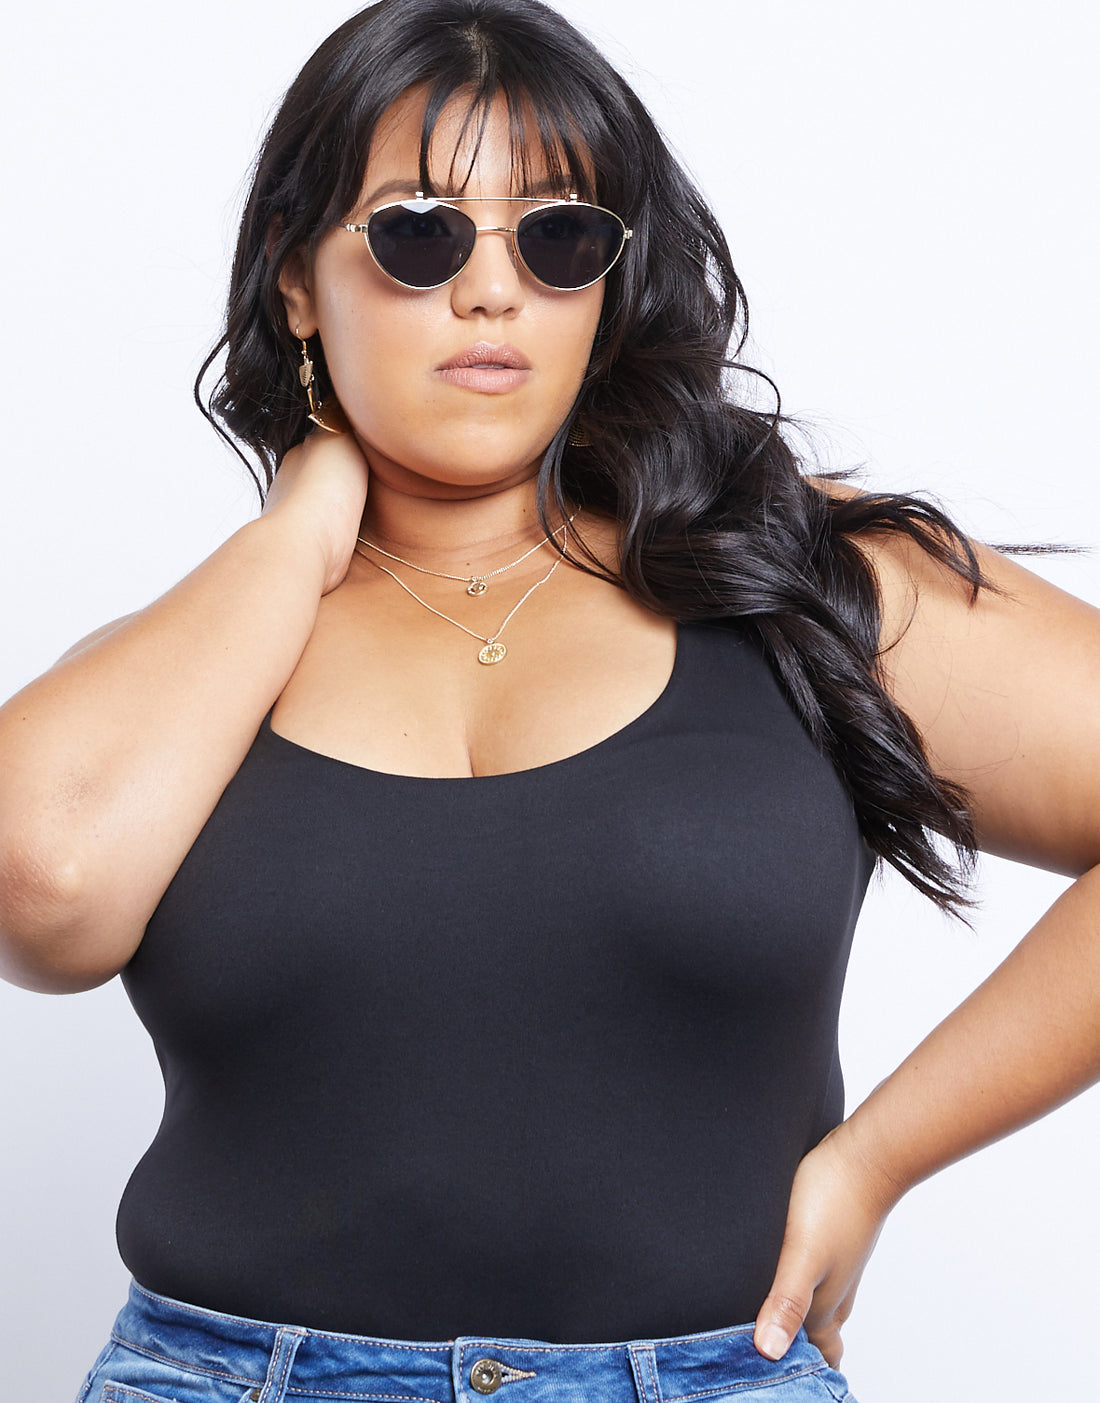 Plus Size Avery Sleeveless Bodysuit - plus size bodysuits and rompers –  2020AVE